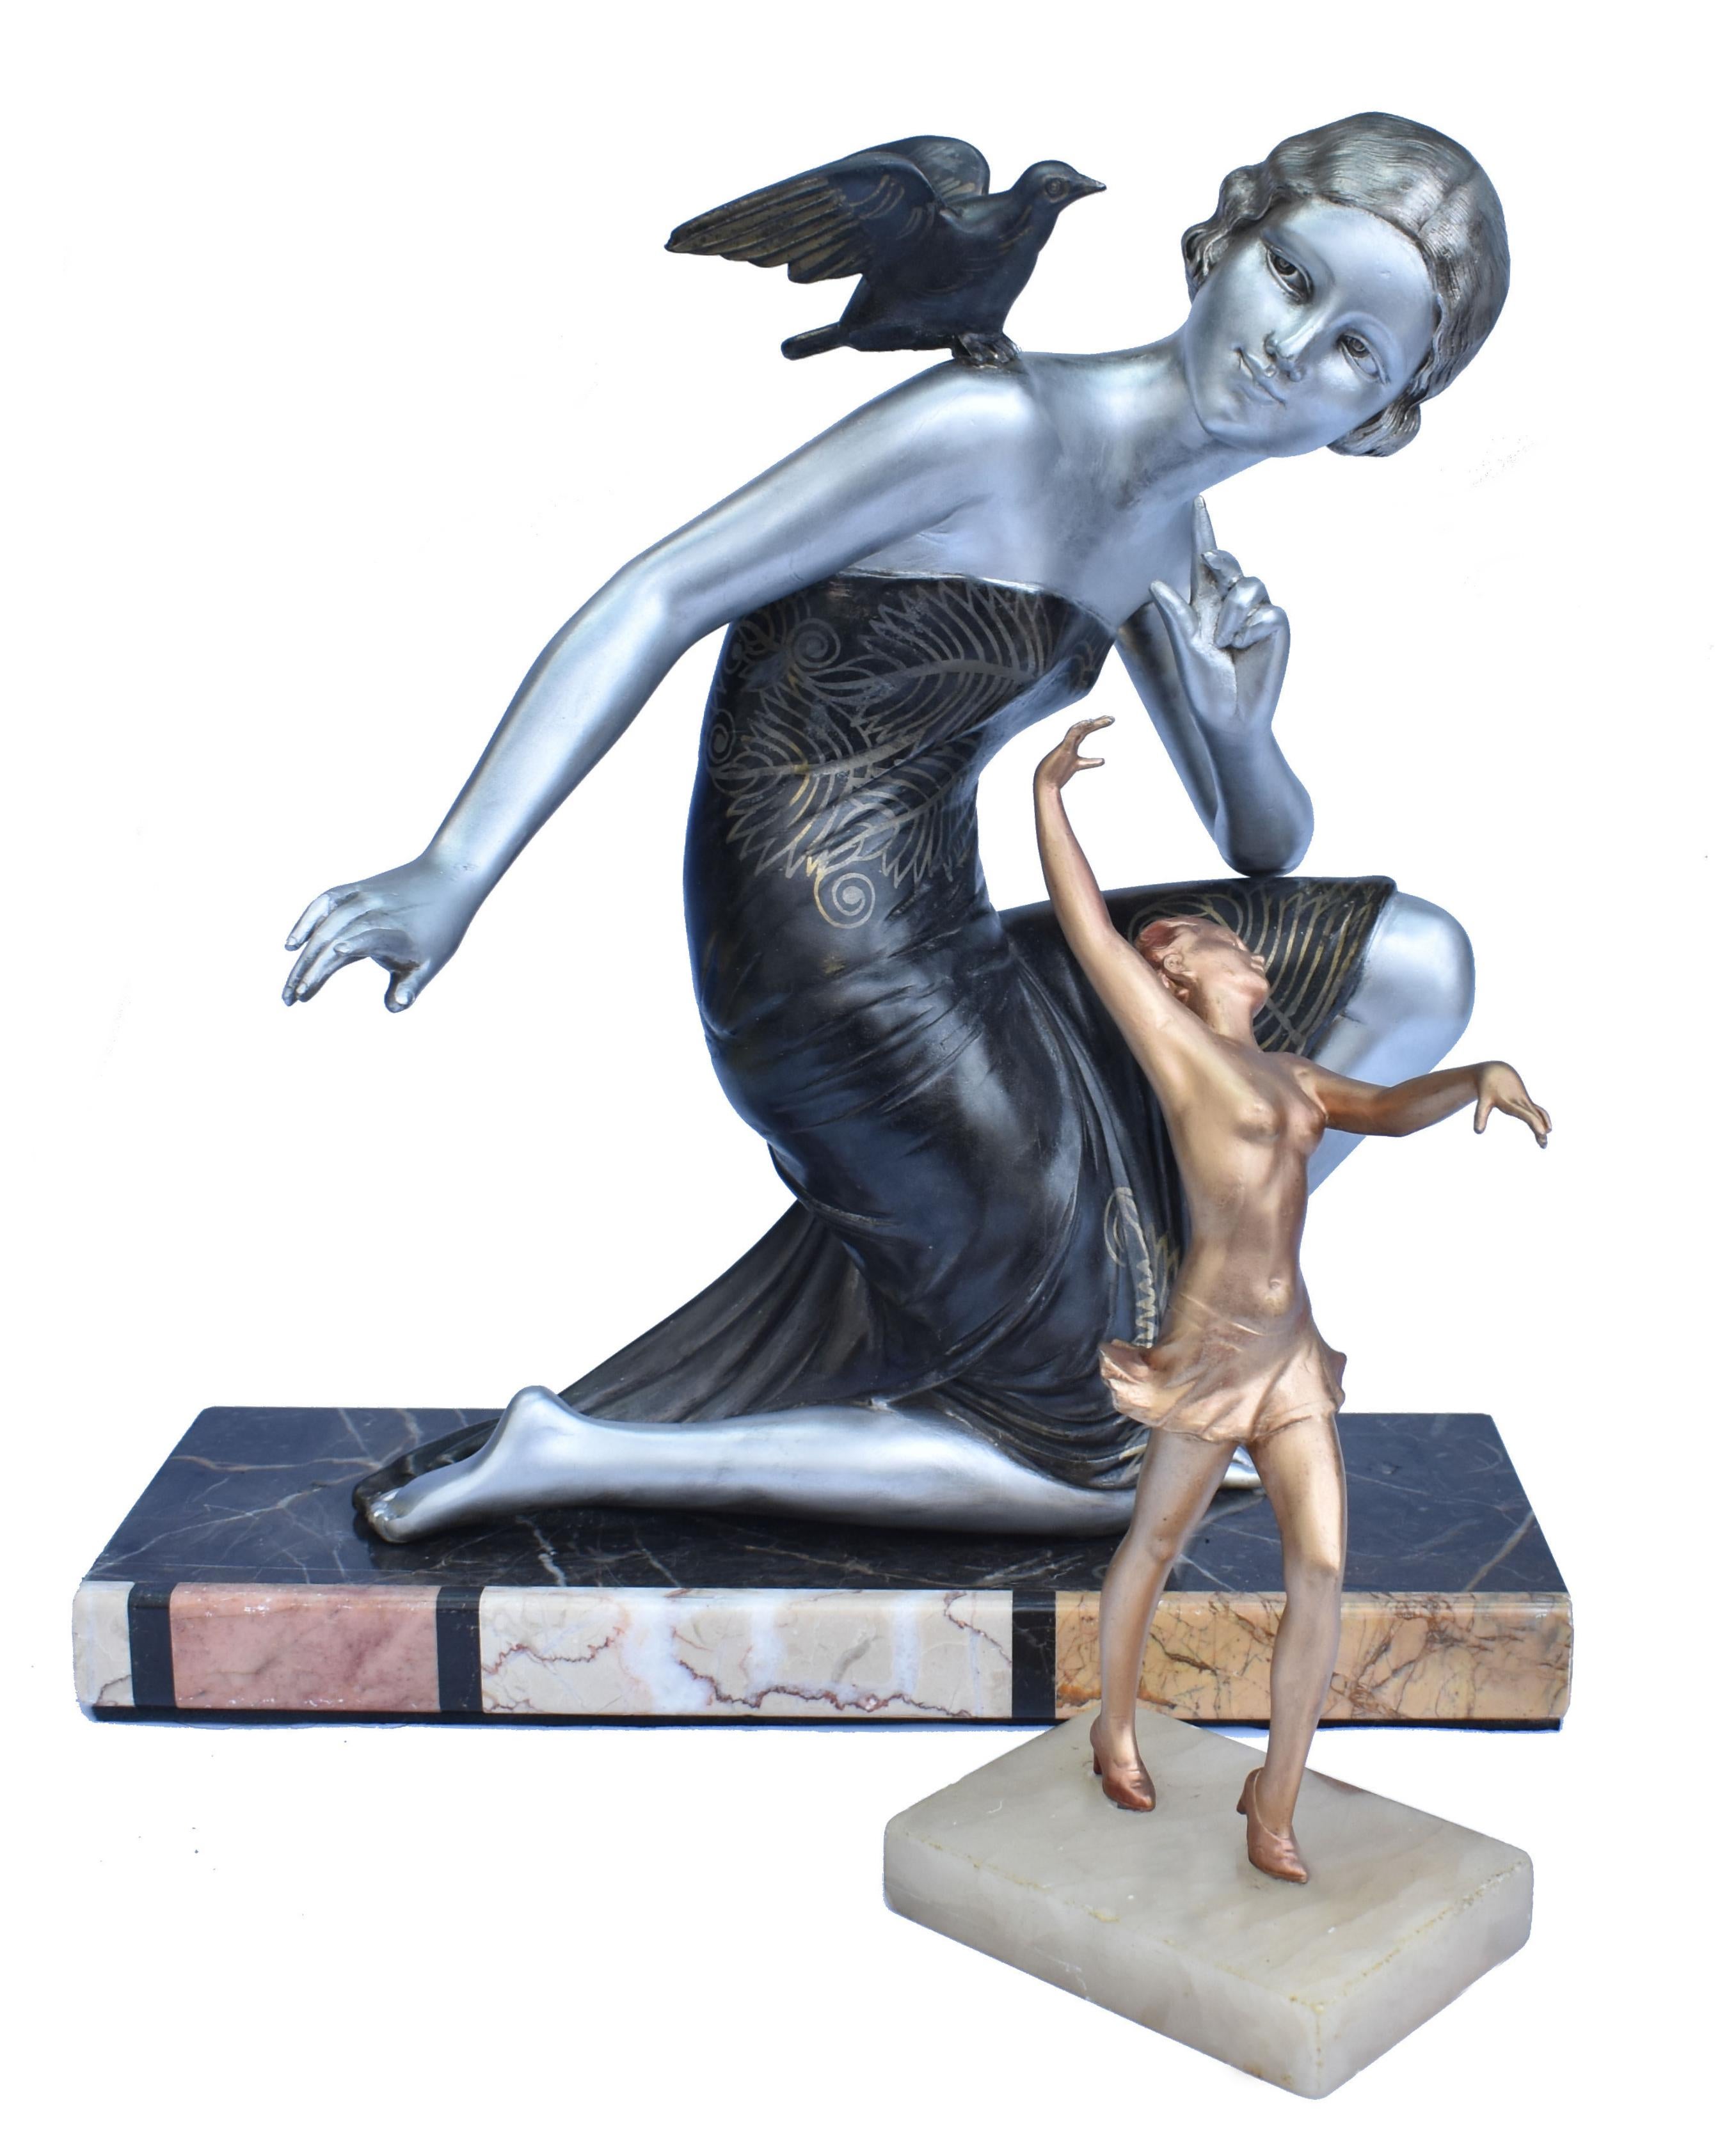 A beautiful and impressively large is this original sculpture from the first half of the last century by Ugo Cipriani. Depicting a figure of a woman with a bird on her shoulder. The sculpture is signed on the base URIANO. Made from spelter and cold